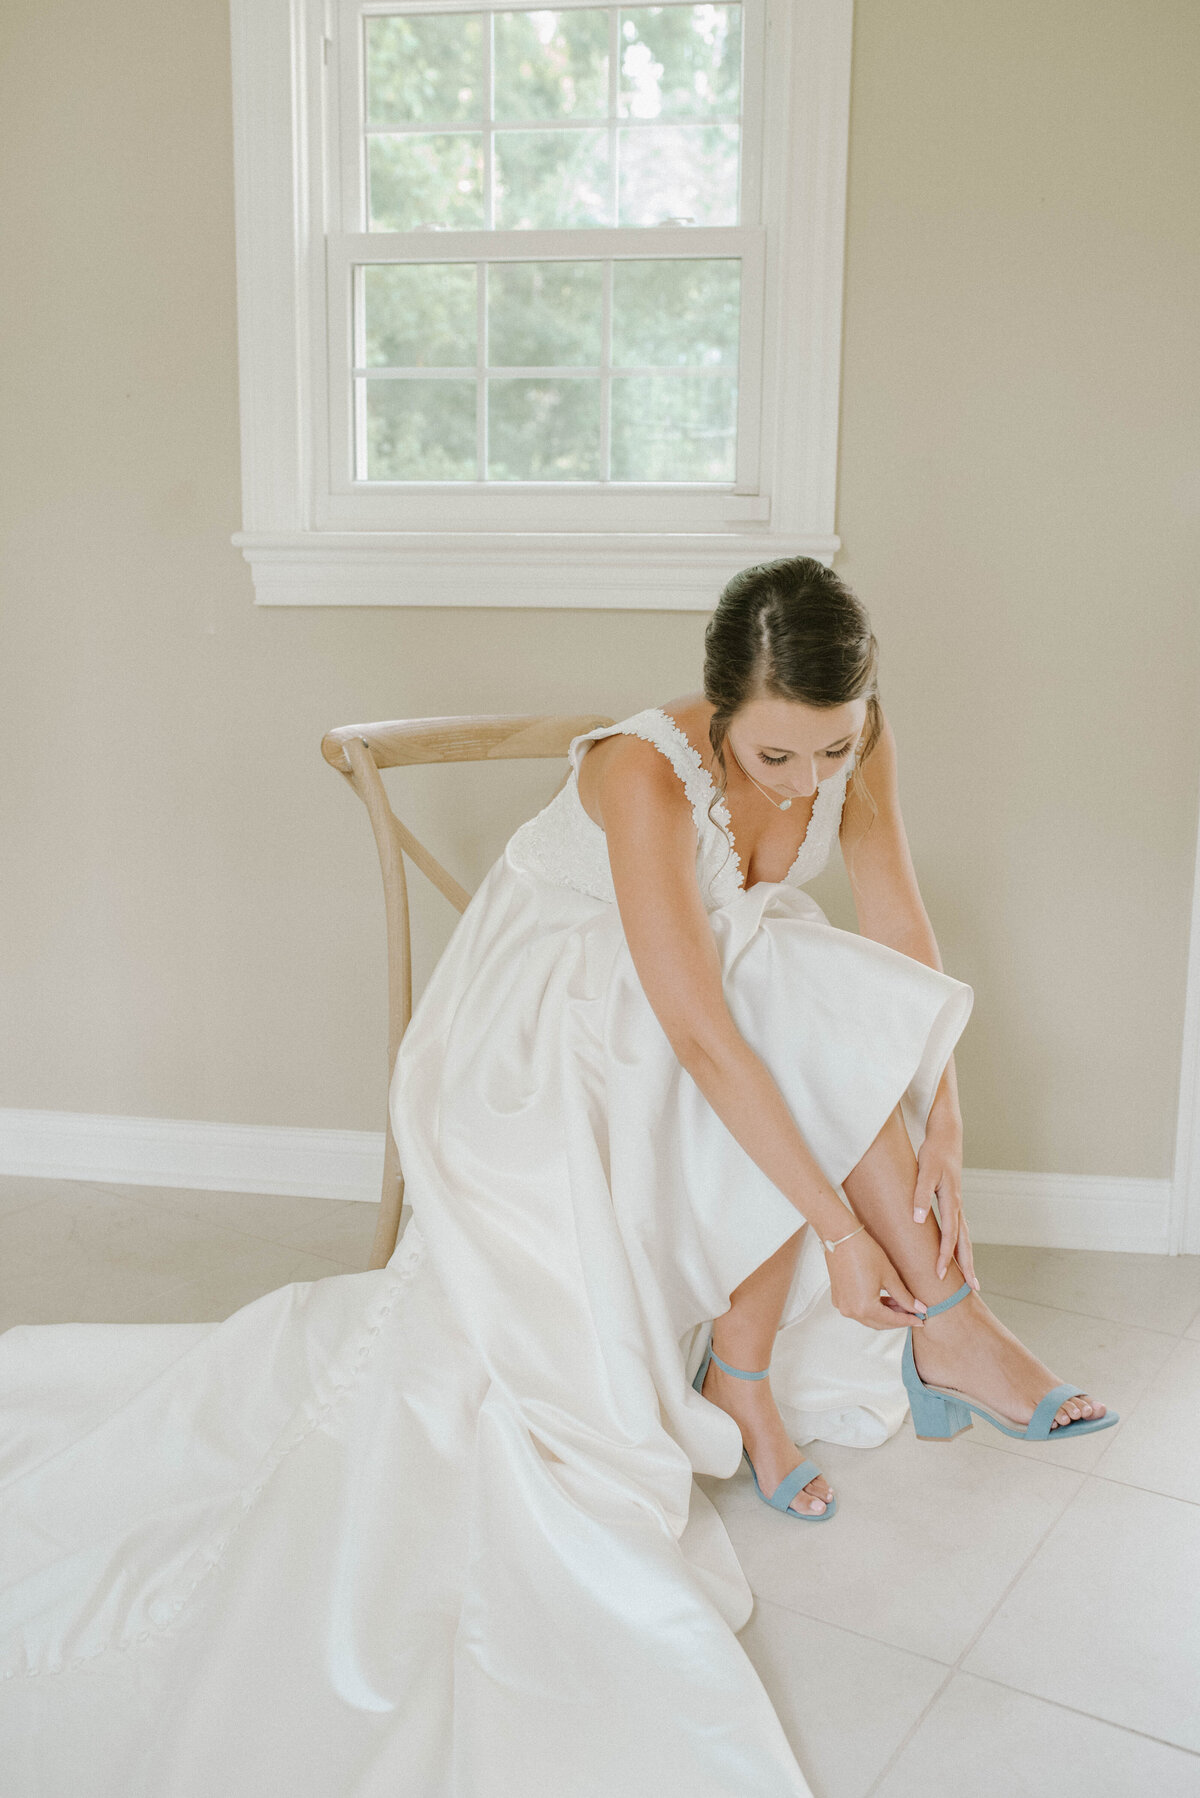 A bride putting on her shoe